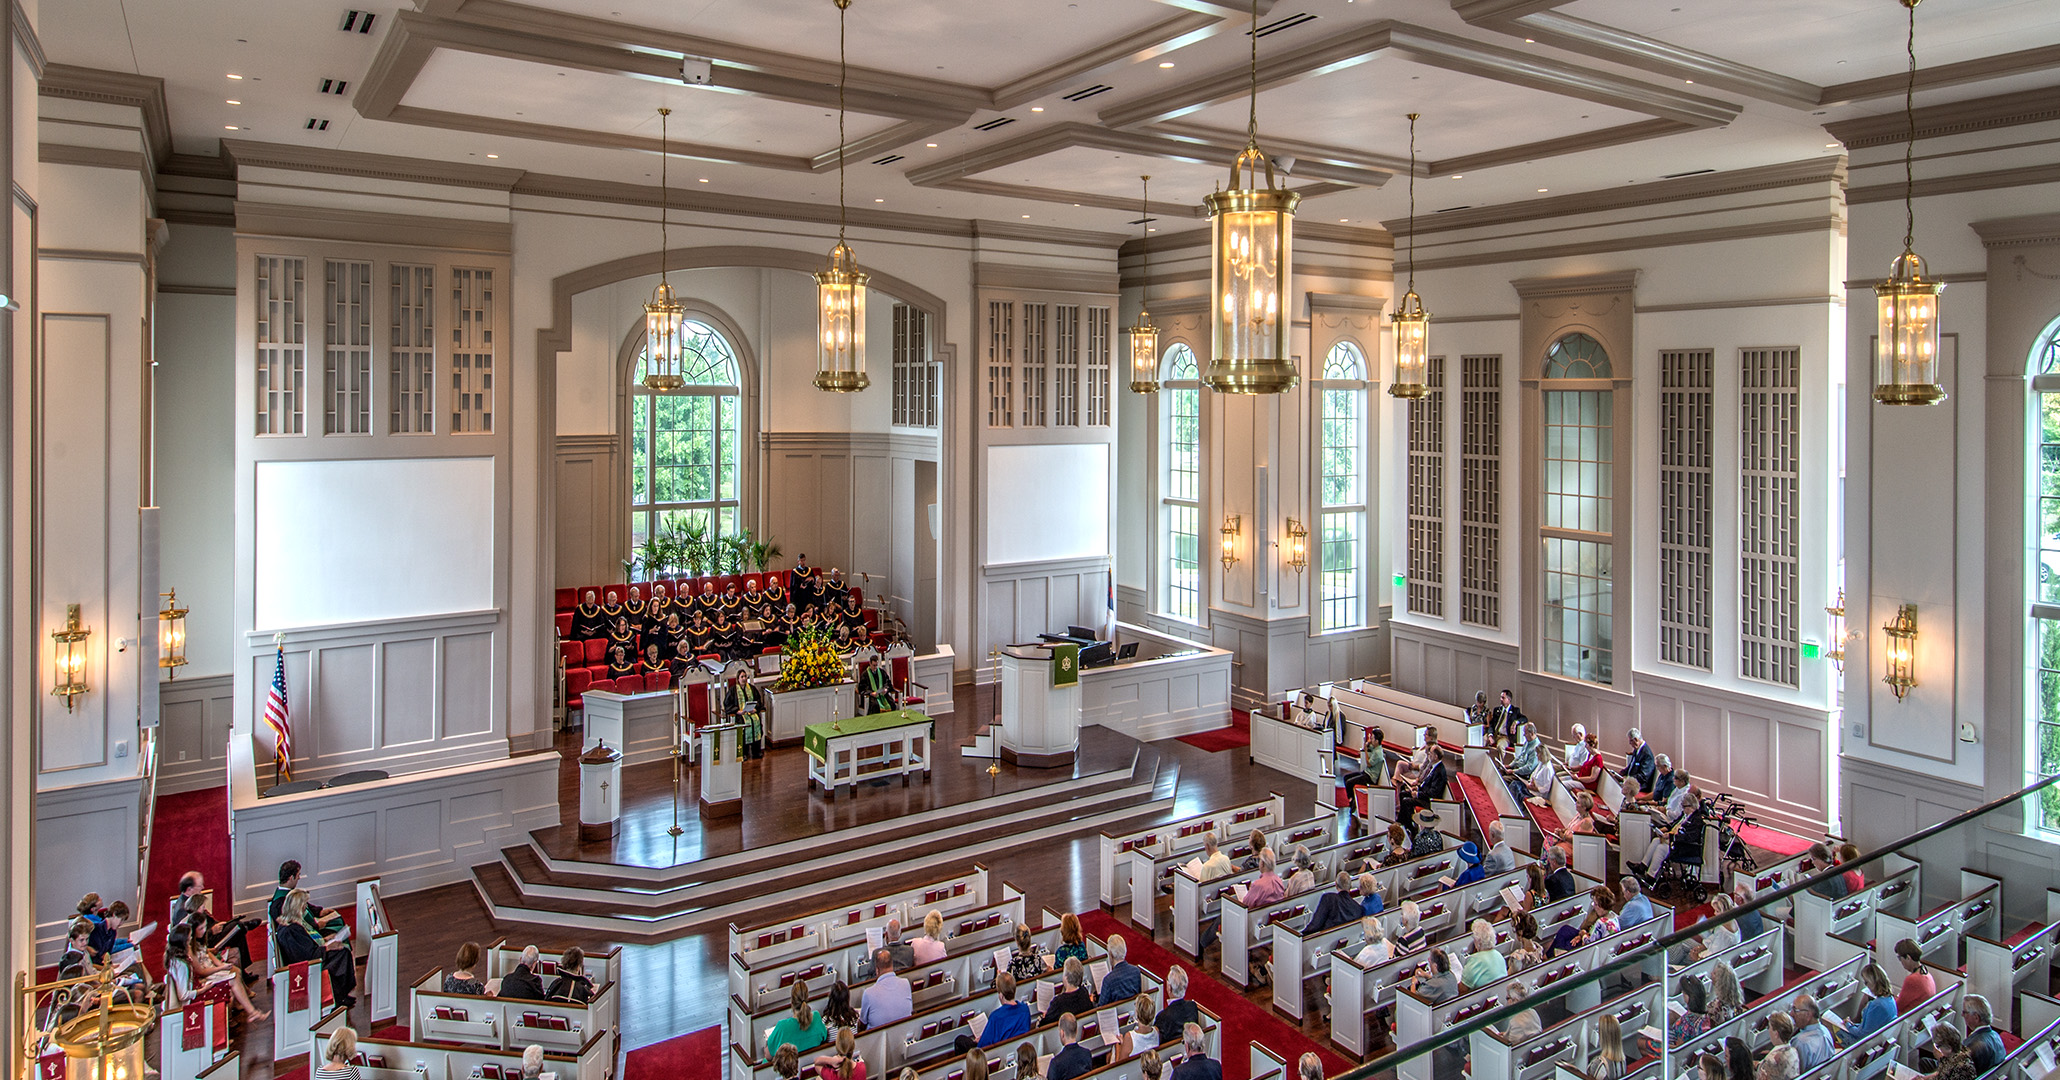 Church goers enjoying the newly designed sanctuary at the First Presbyterian Church in Myrtle Beach.